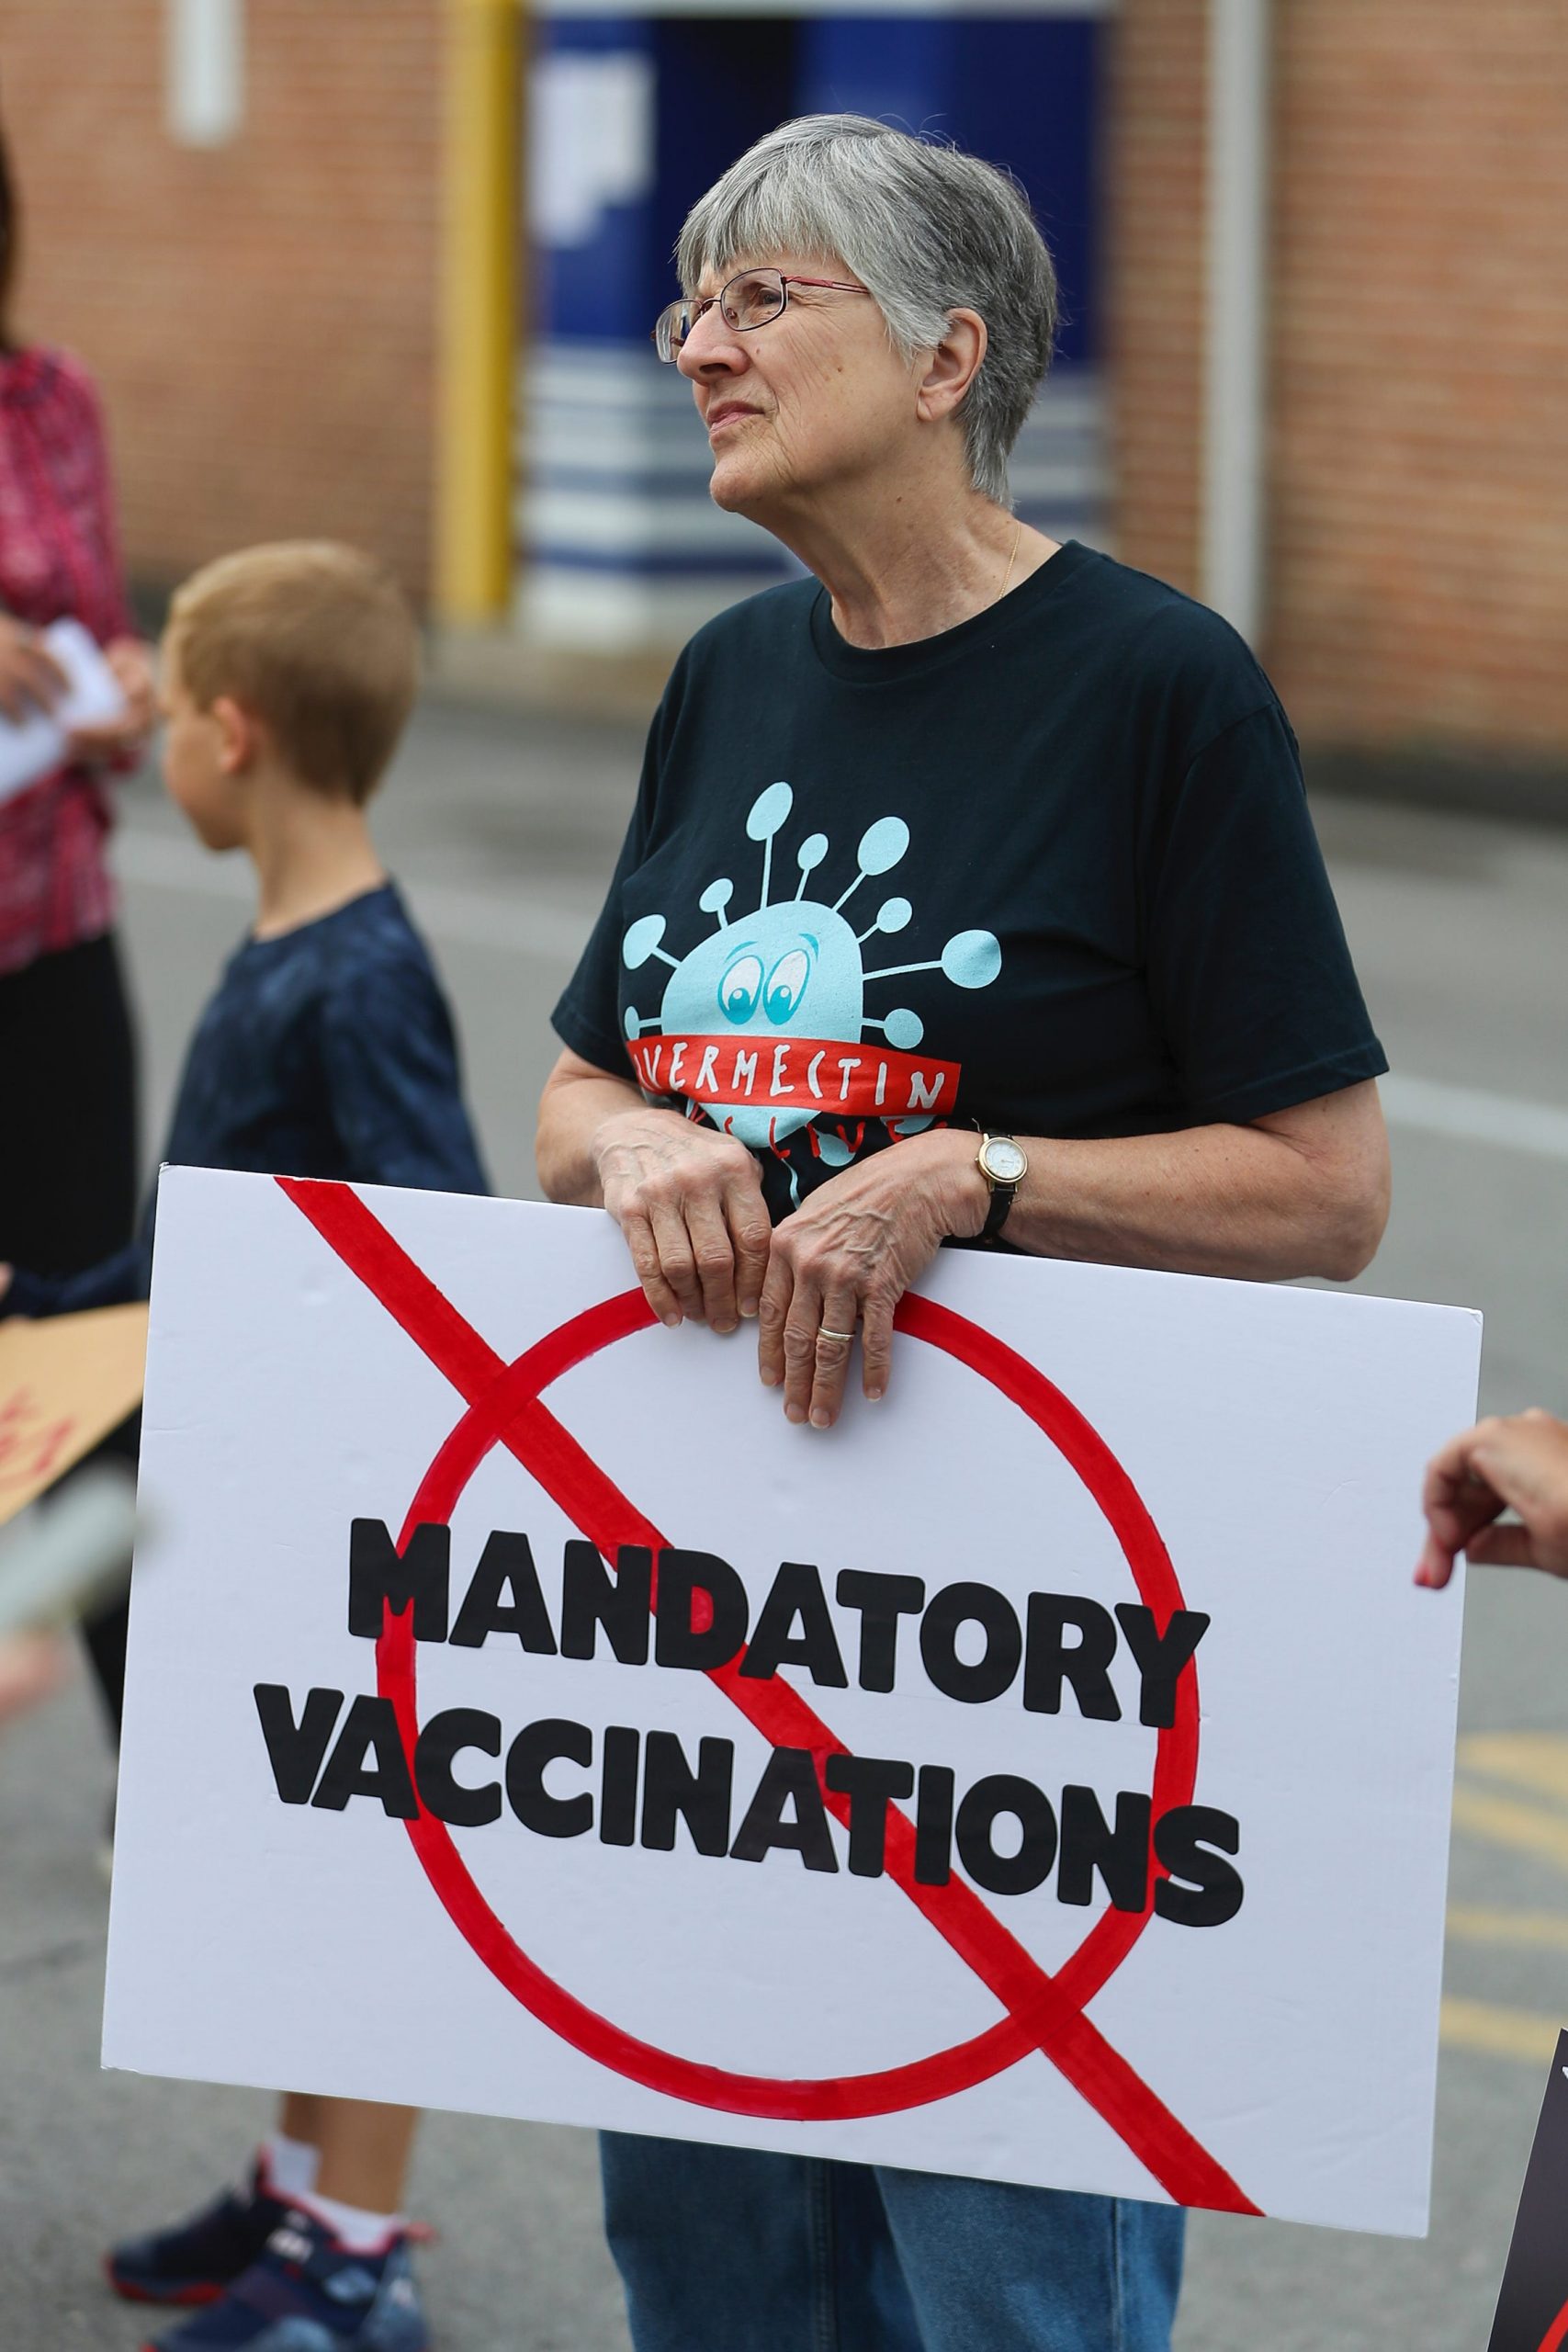 woman at vaccine protest standing holding sign ('no mandatory vaccinations') is wearing FLCCC shirt promoting the use of ivermectin, a deworming drug that has not been proven to help patients with COVID-19.